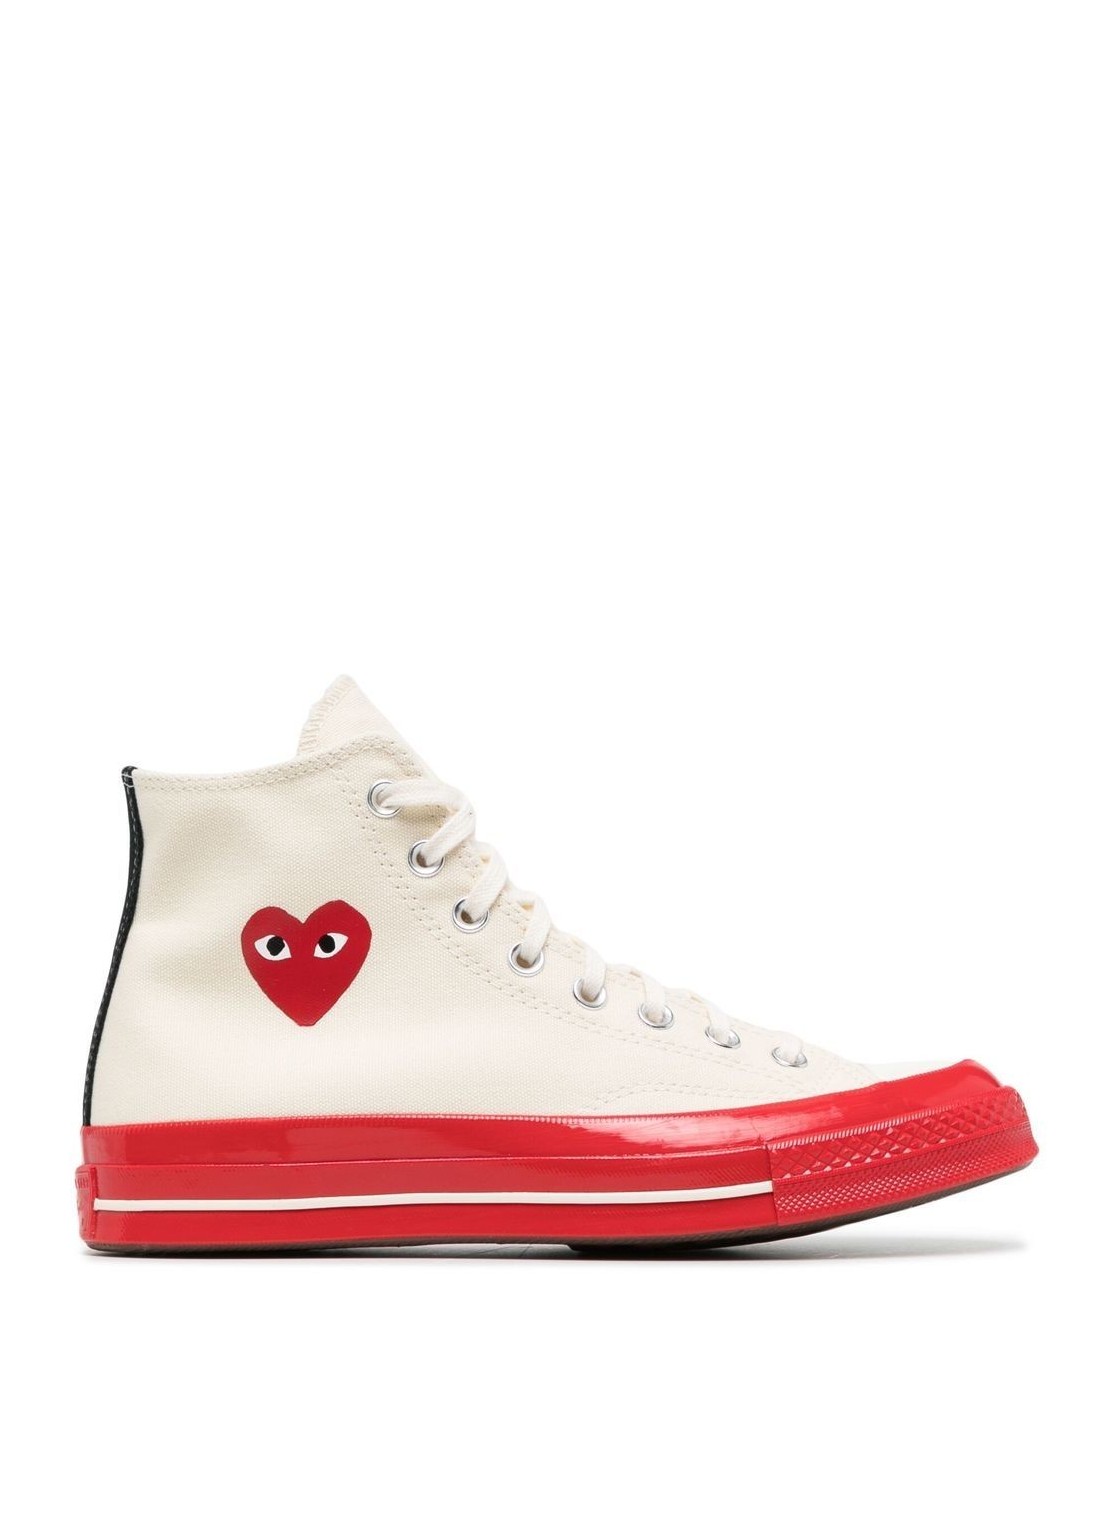 comme des garcons converse red sole high top - 35